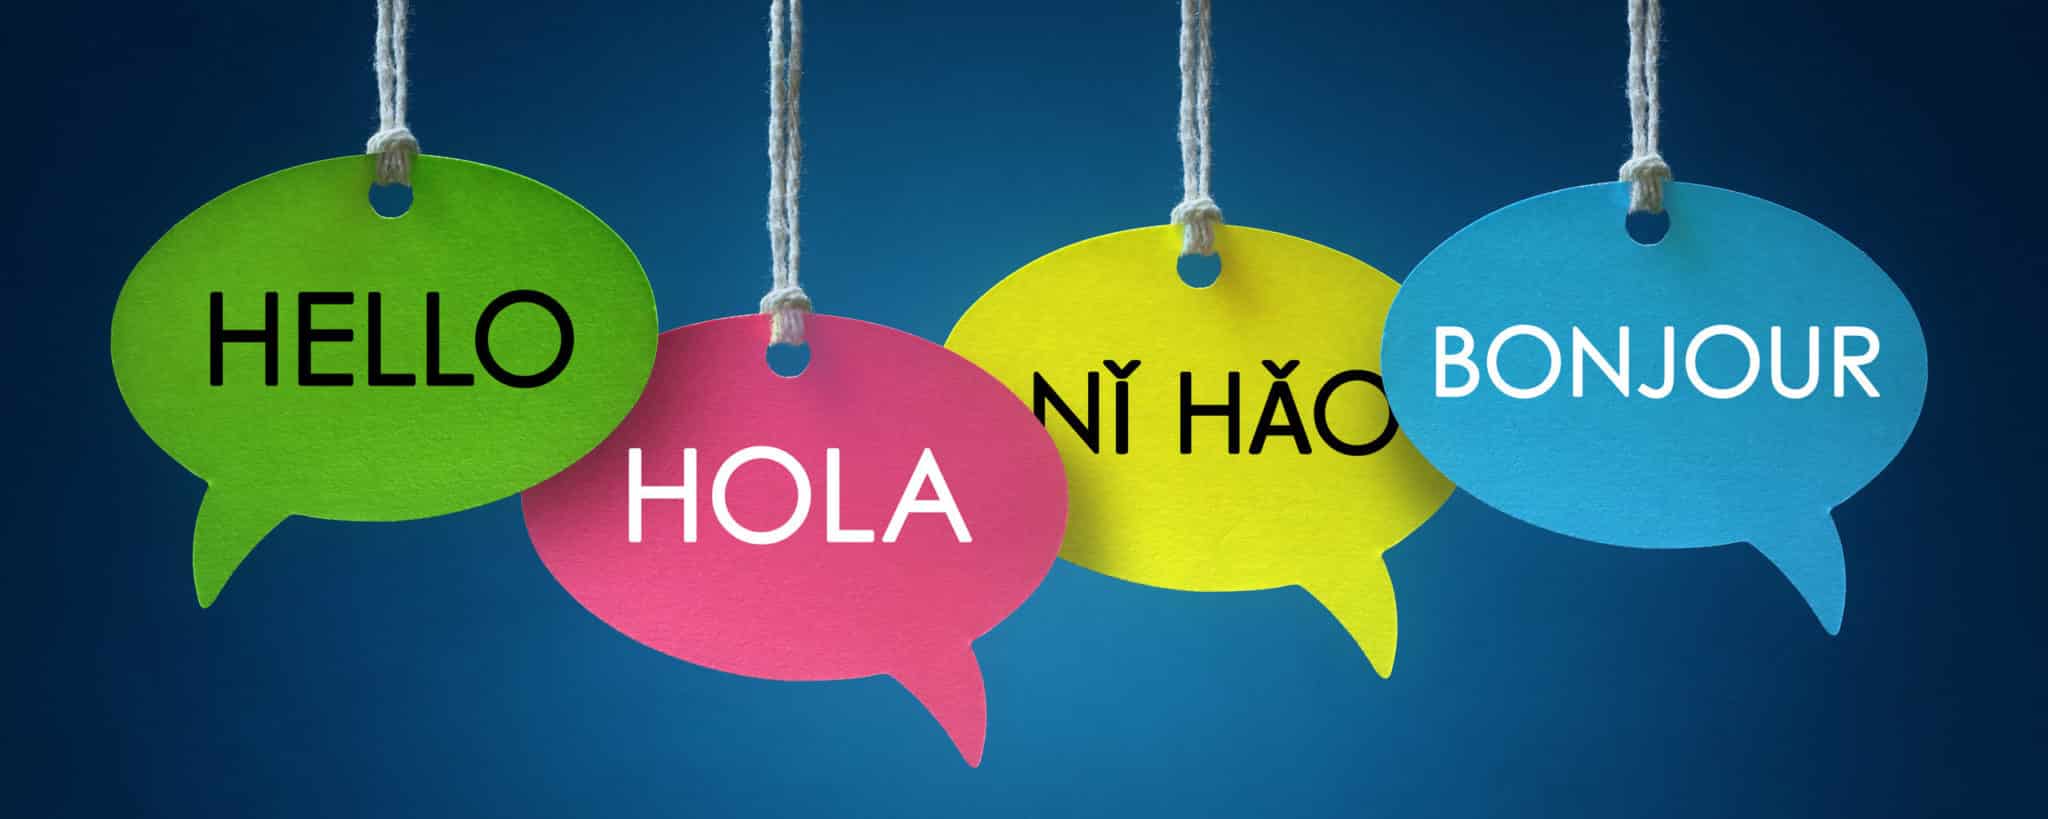 Signs with multi-lingual expressions for hello